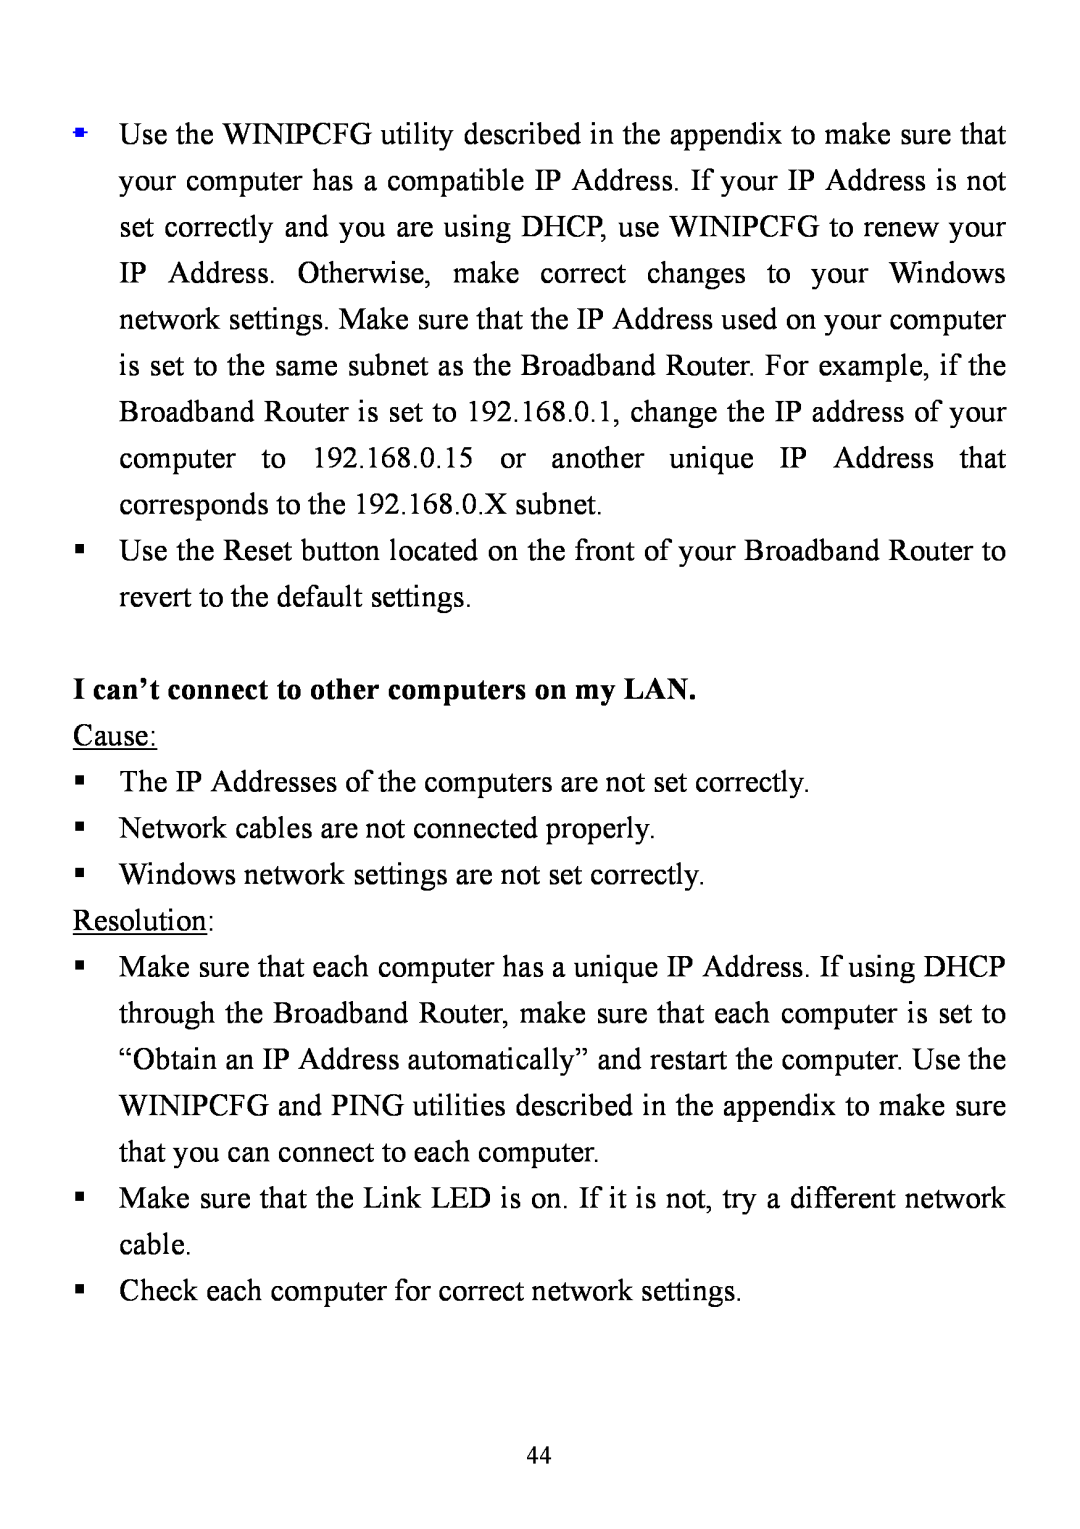 D-Link DI-714 user manual I can’t connect to other computers on my LAN 